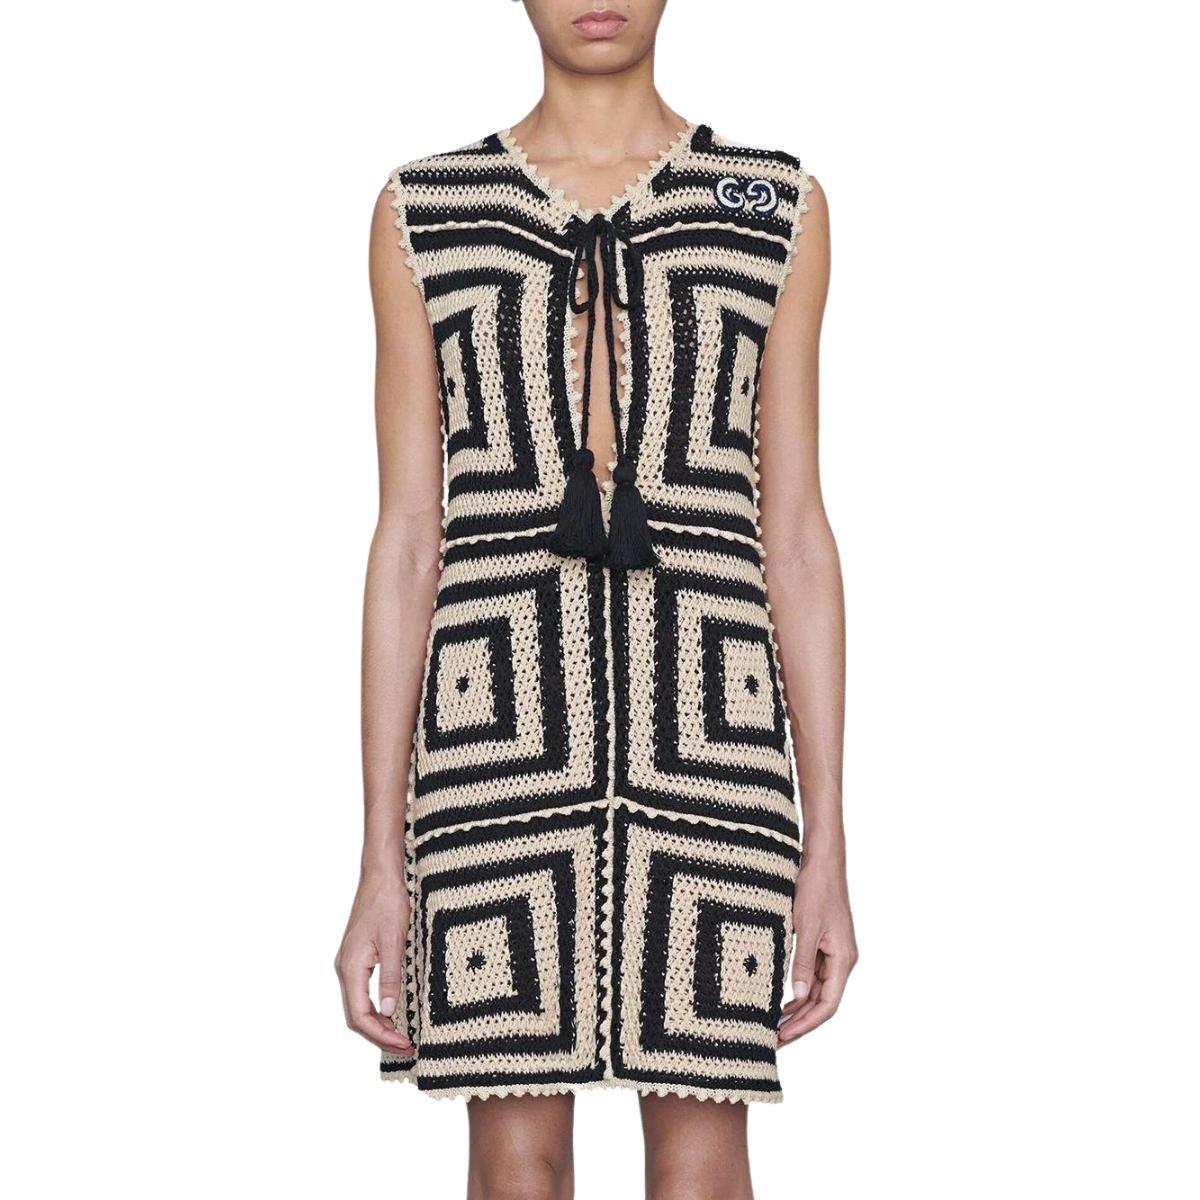 FOLLOW US @RUNWAYCATALOG

This beige and dark blue cotton crochet-knit short dress from Gucci is presented in an intarsia panelled style.
beige/dark blue
Crochet design
Patterned intarsia knit
Keyhole neck
Round neck
Sleeveless
Composition: Cotton